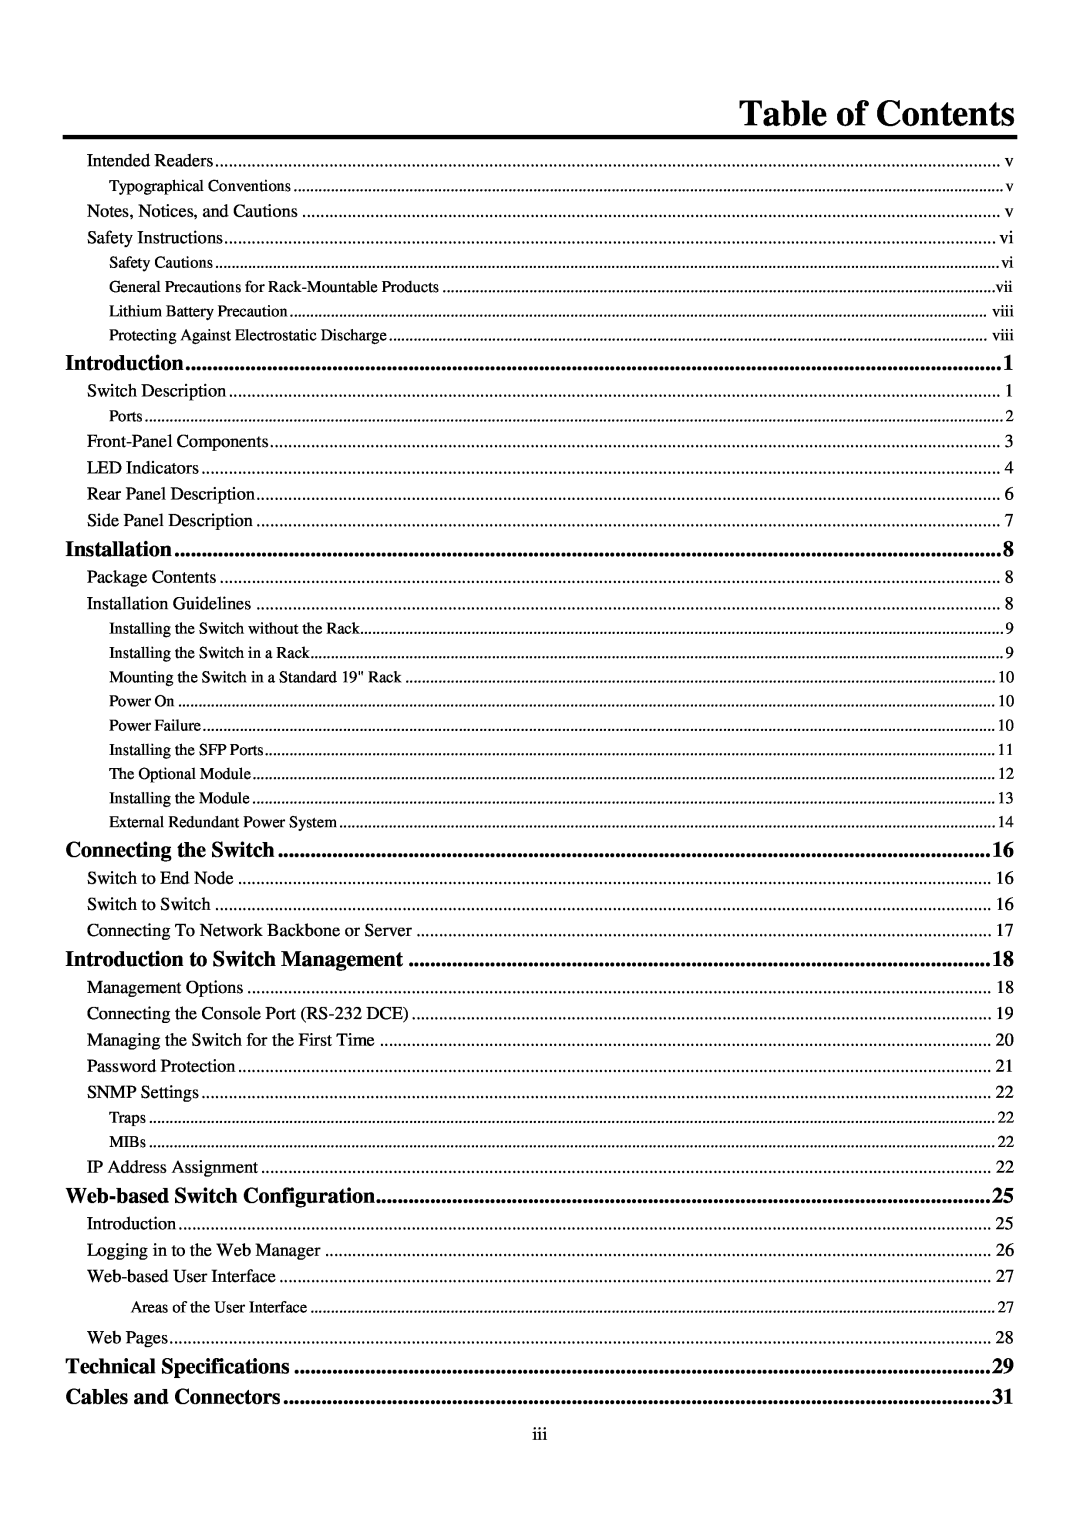 D-Link ethernet managed switch manual Table of Contents, viii, Introduction, Installation, Connecting the Switch 